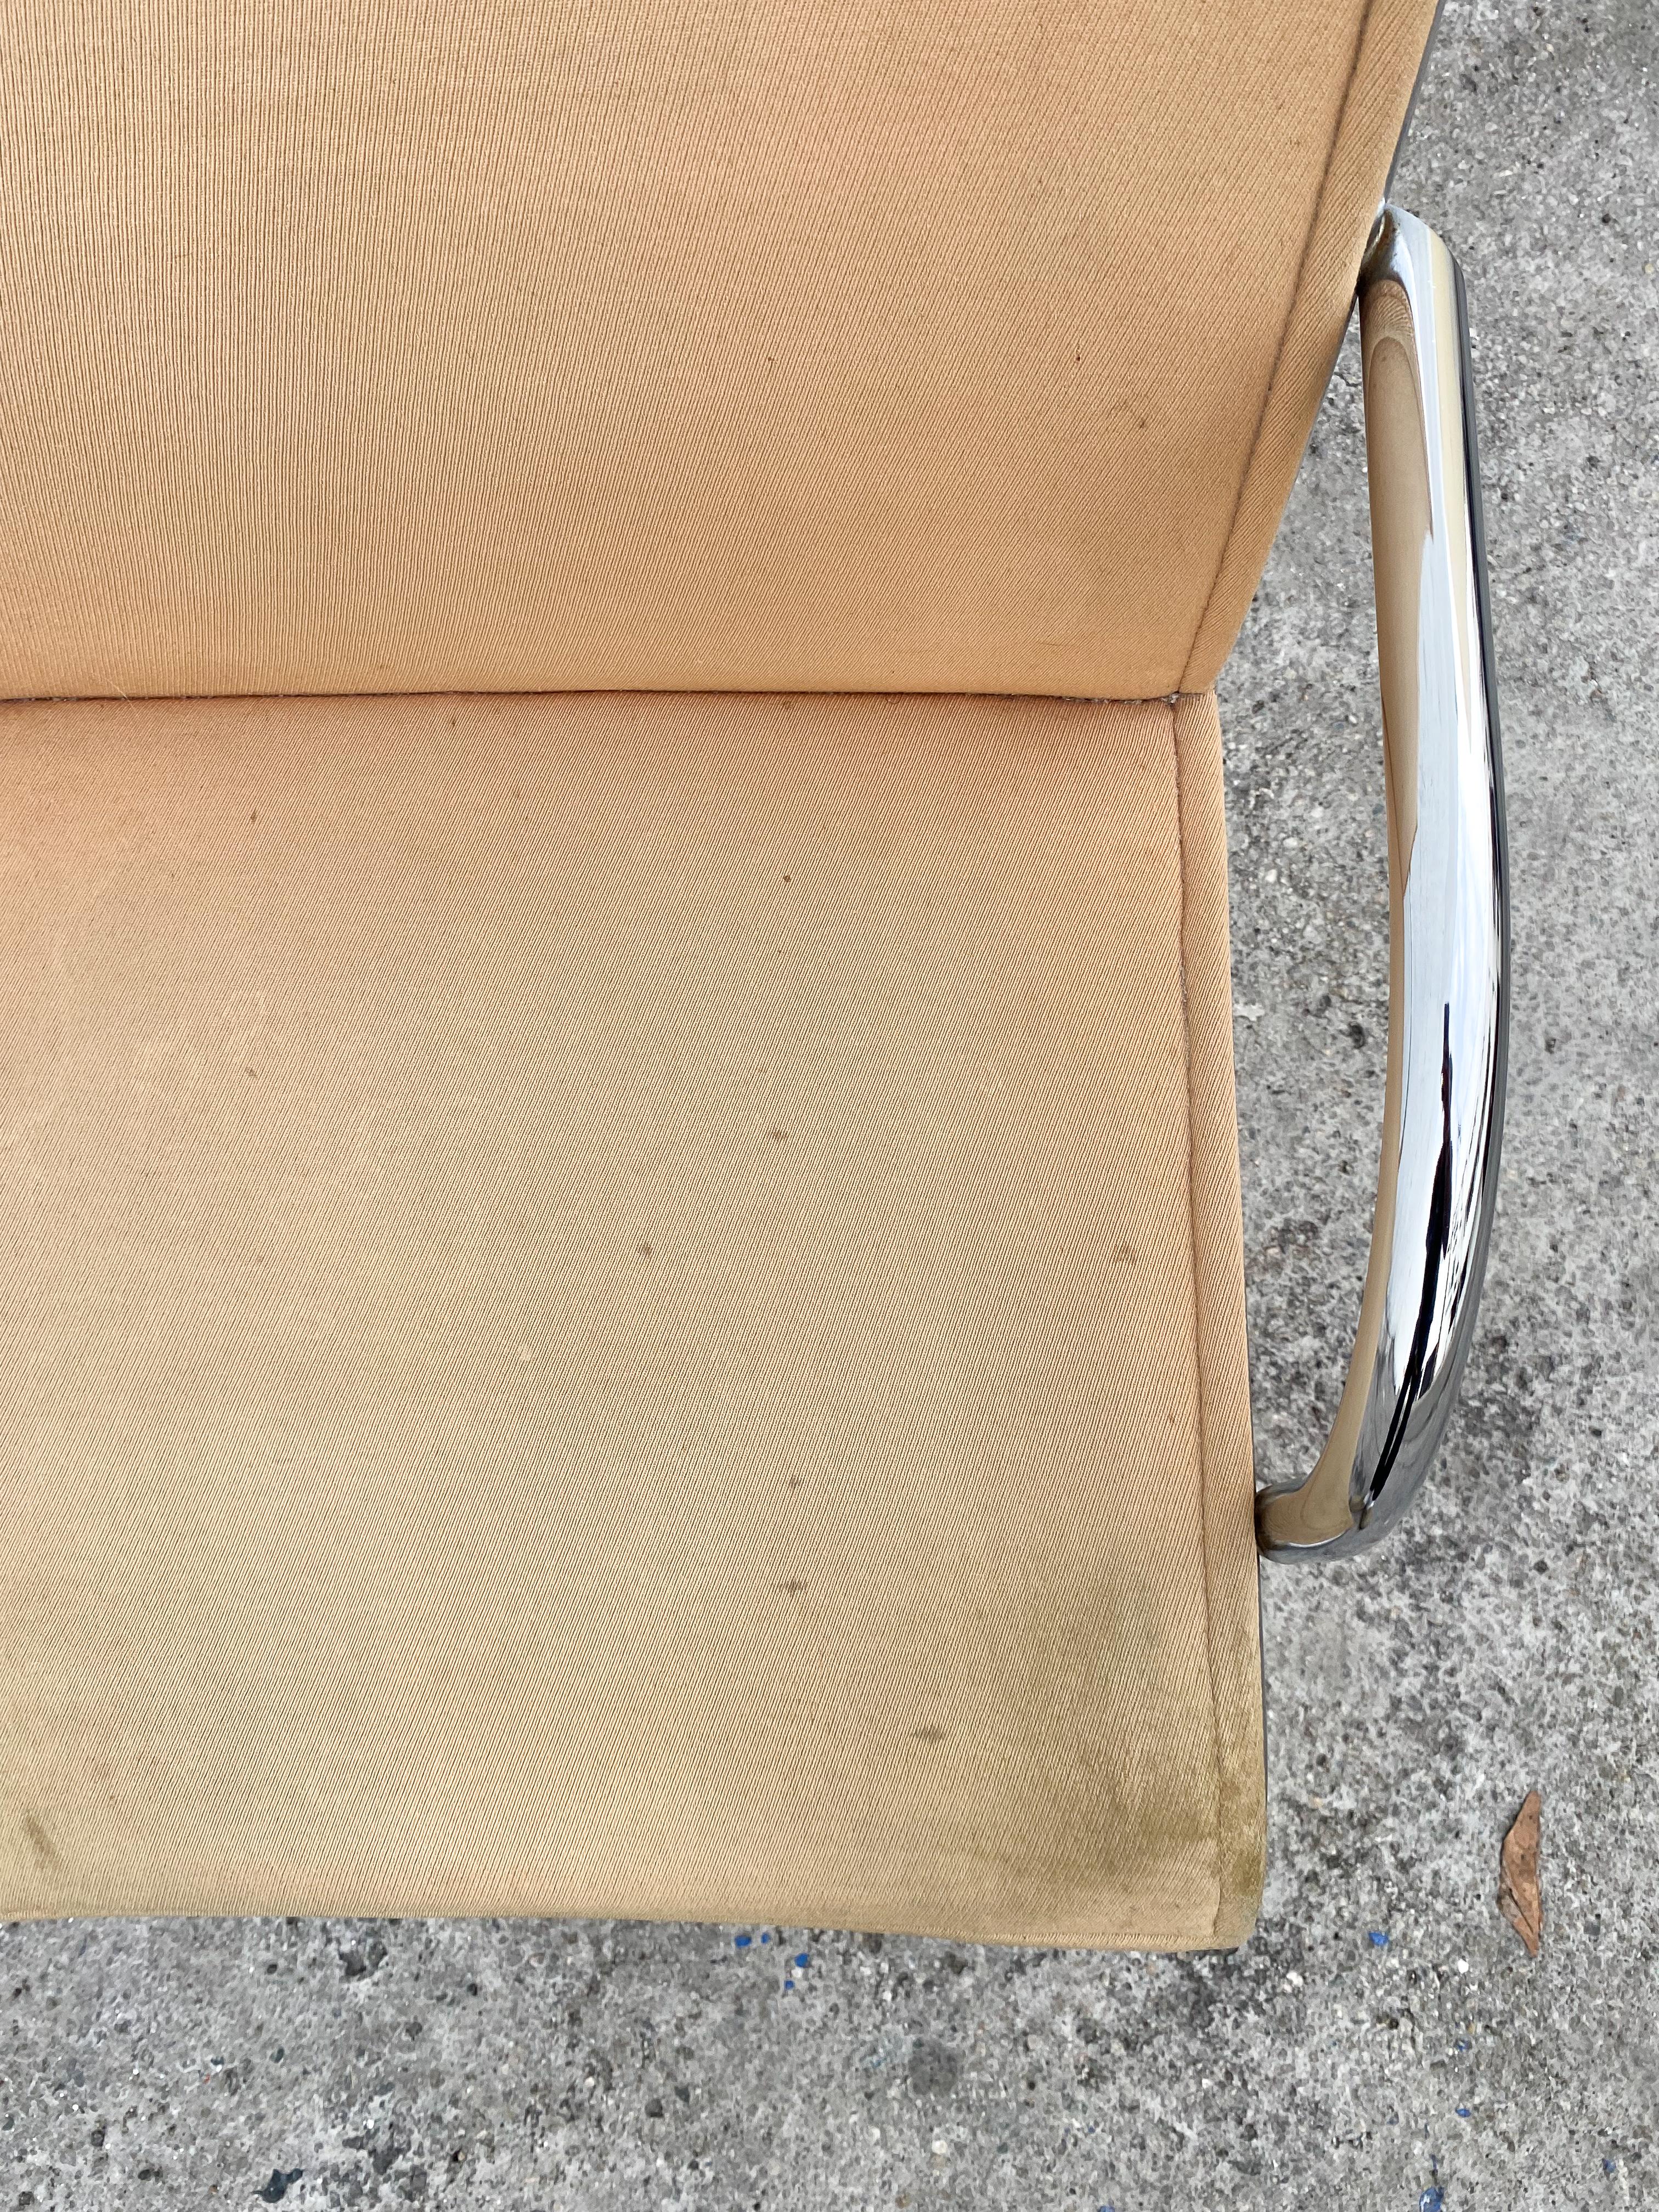 Knoll 1407 Chair by Richard Schultz For Sale 1